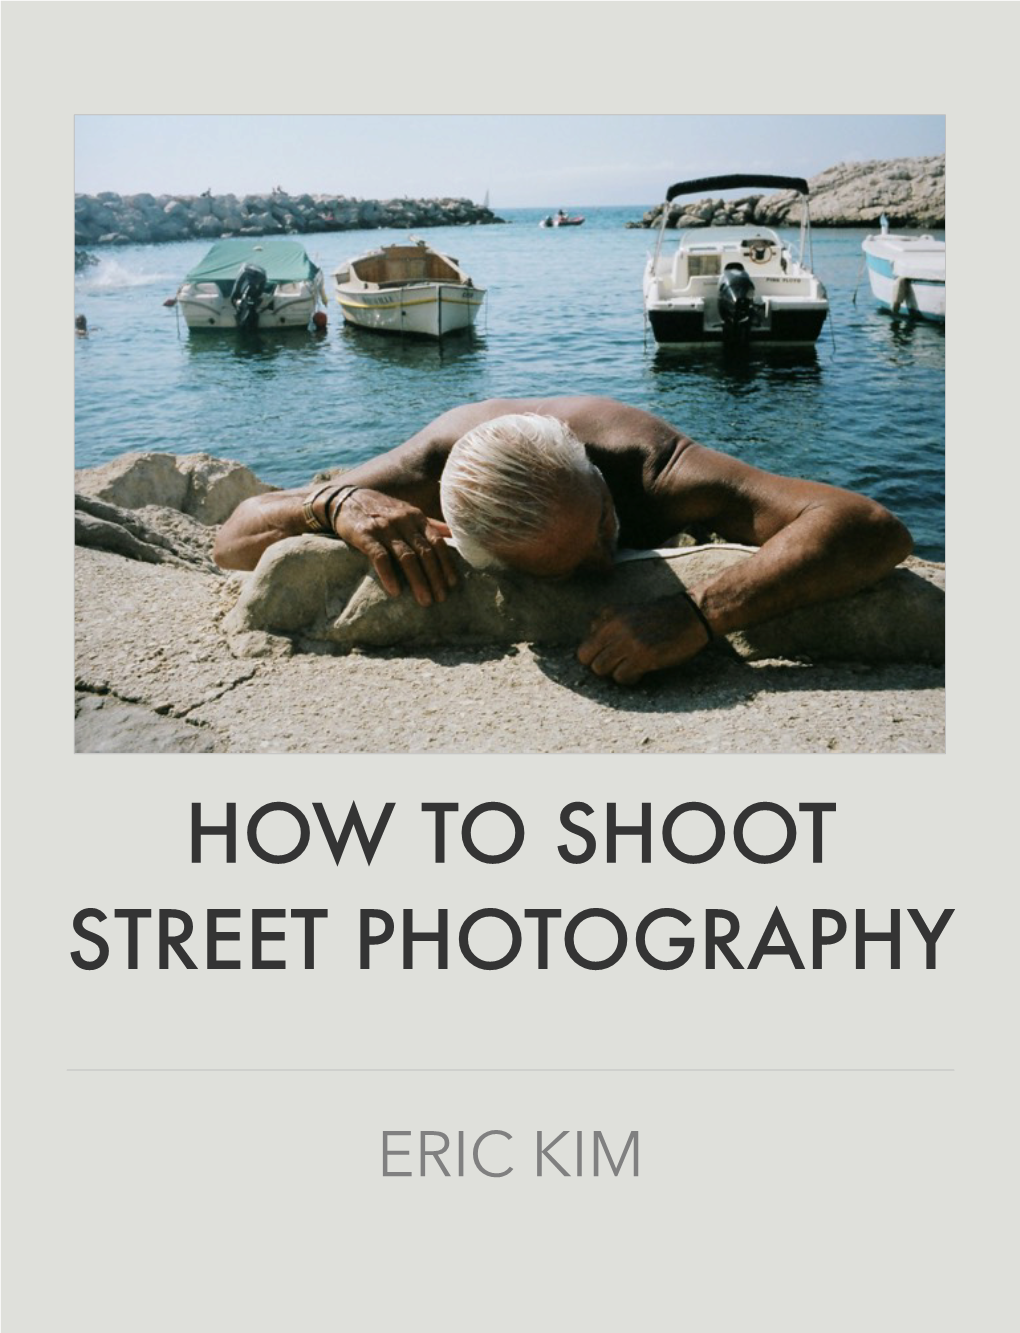 How to Shoot Street Photography